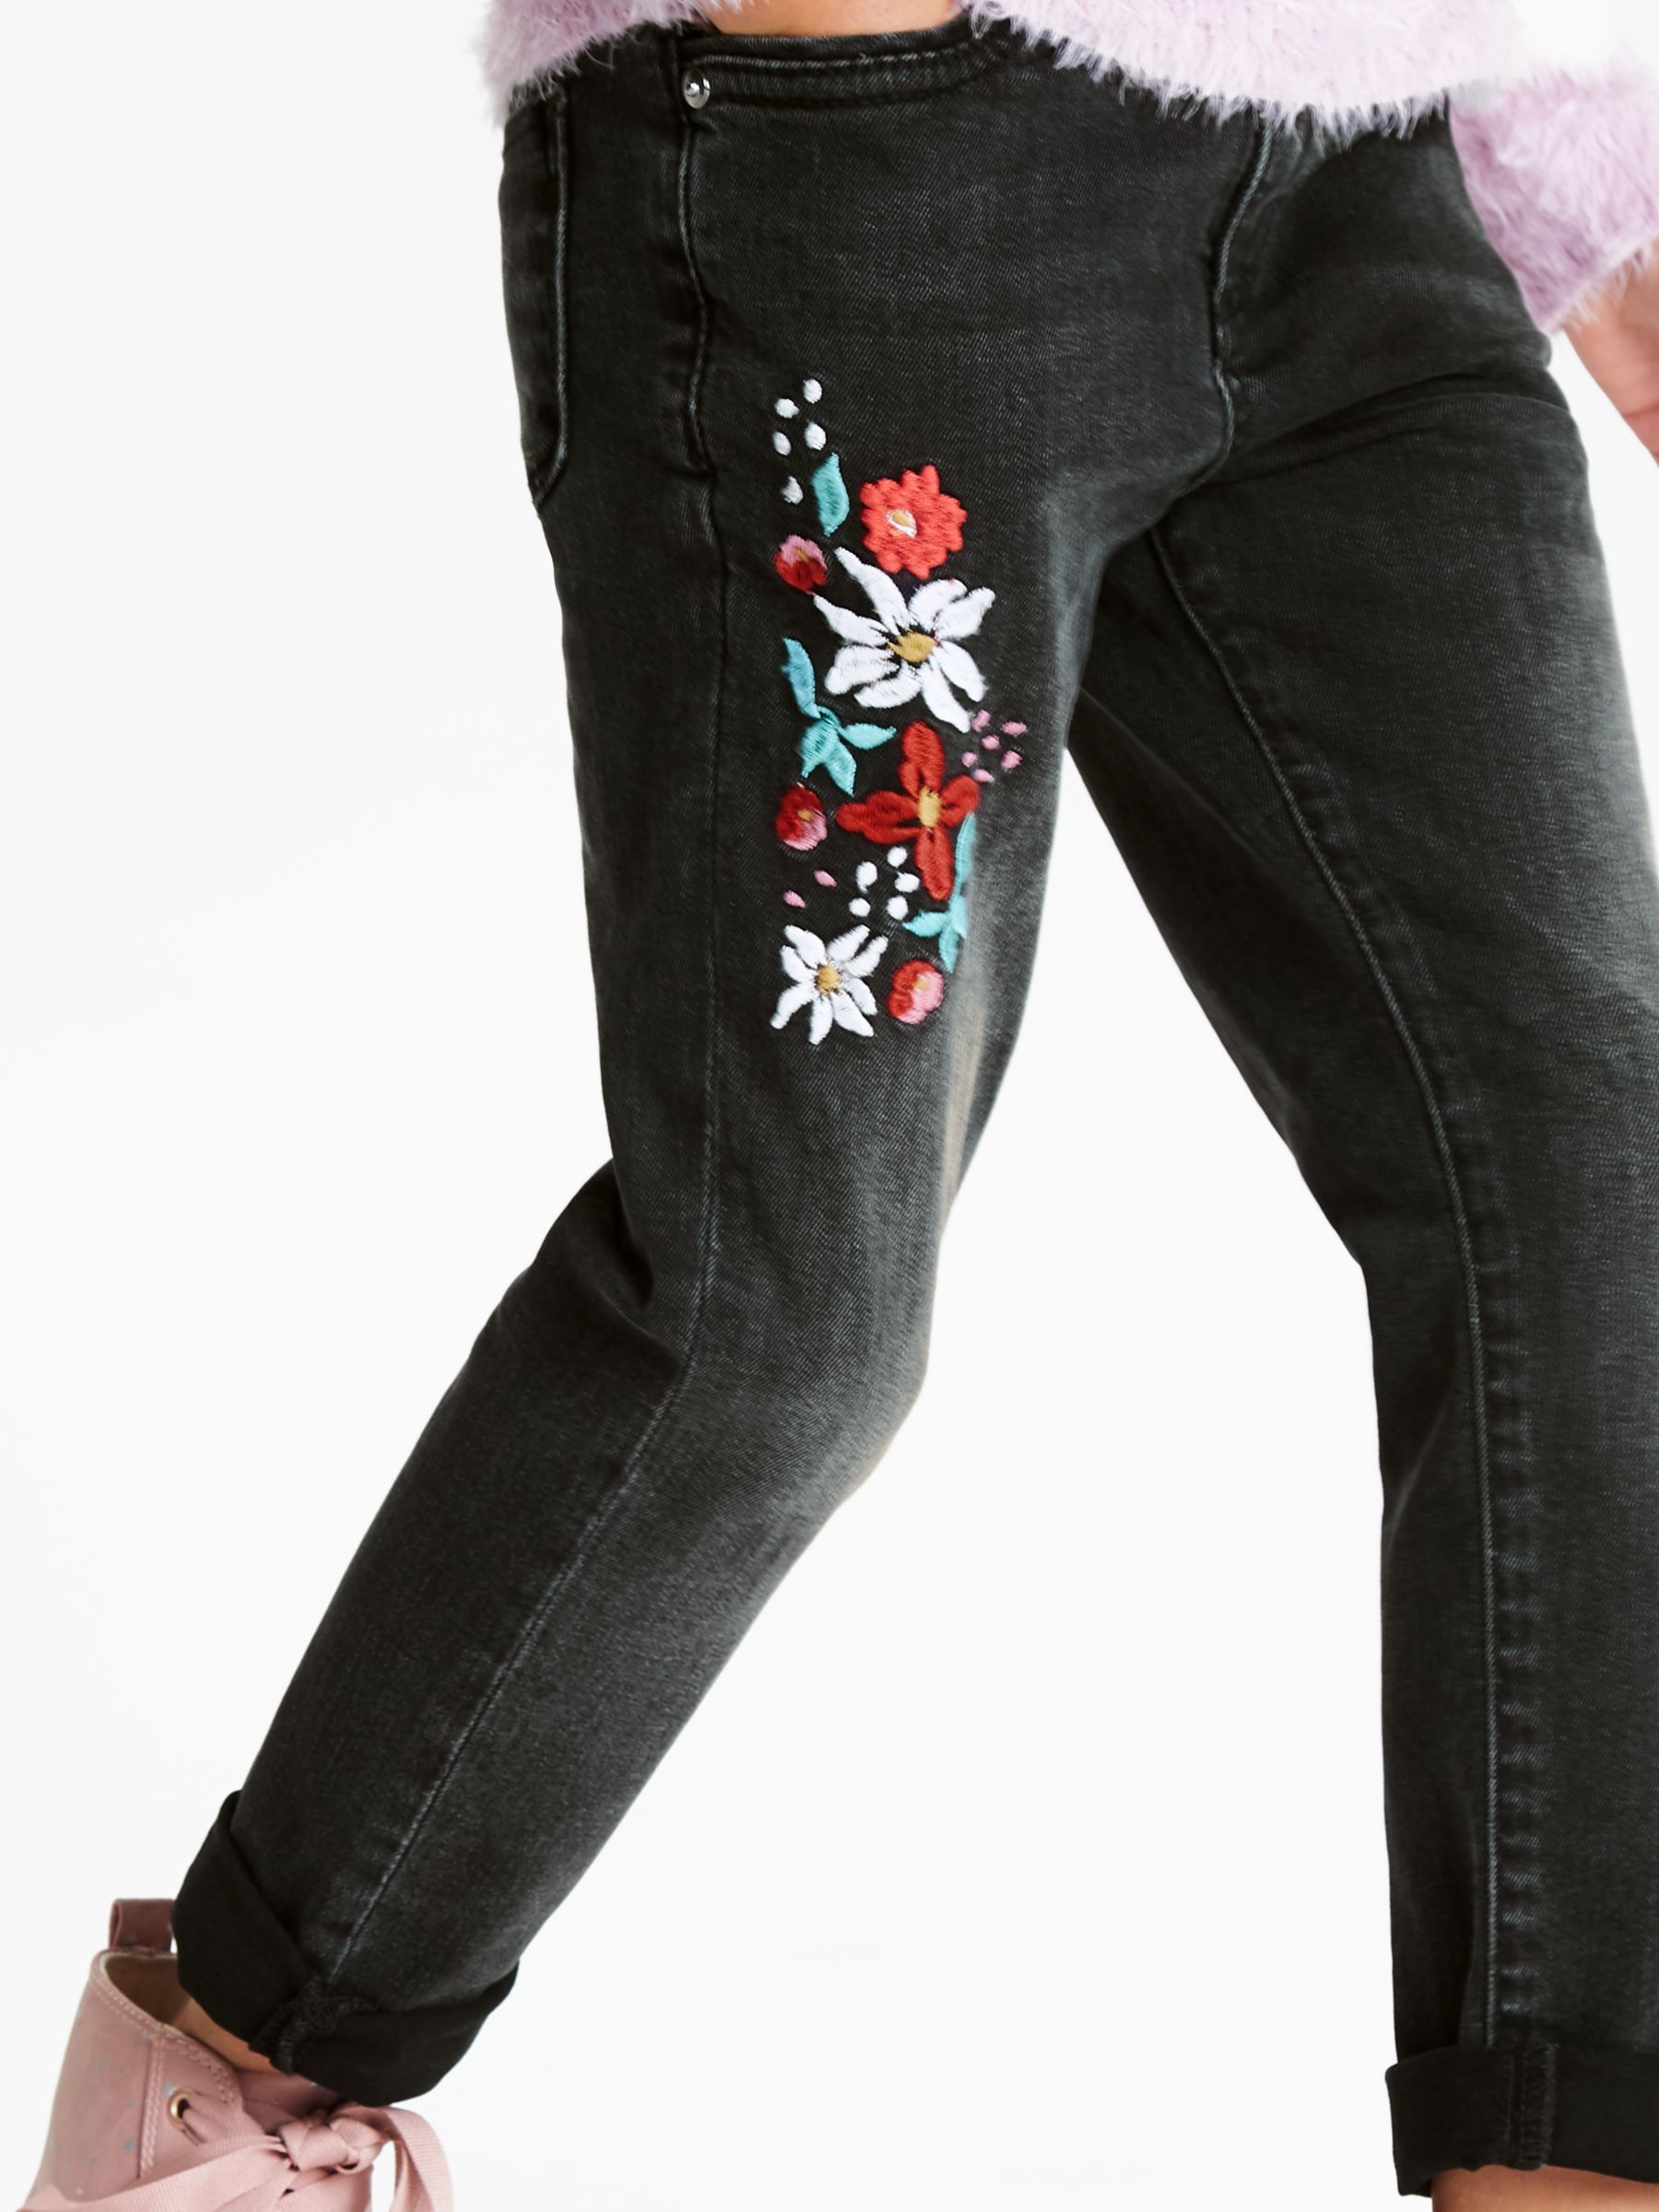 girls embroidered jeans